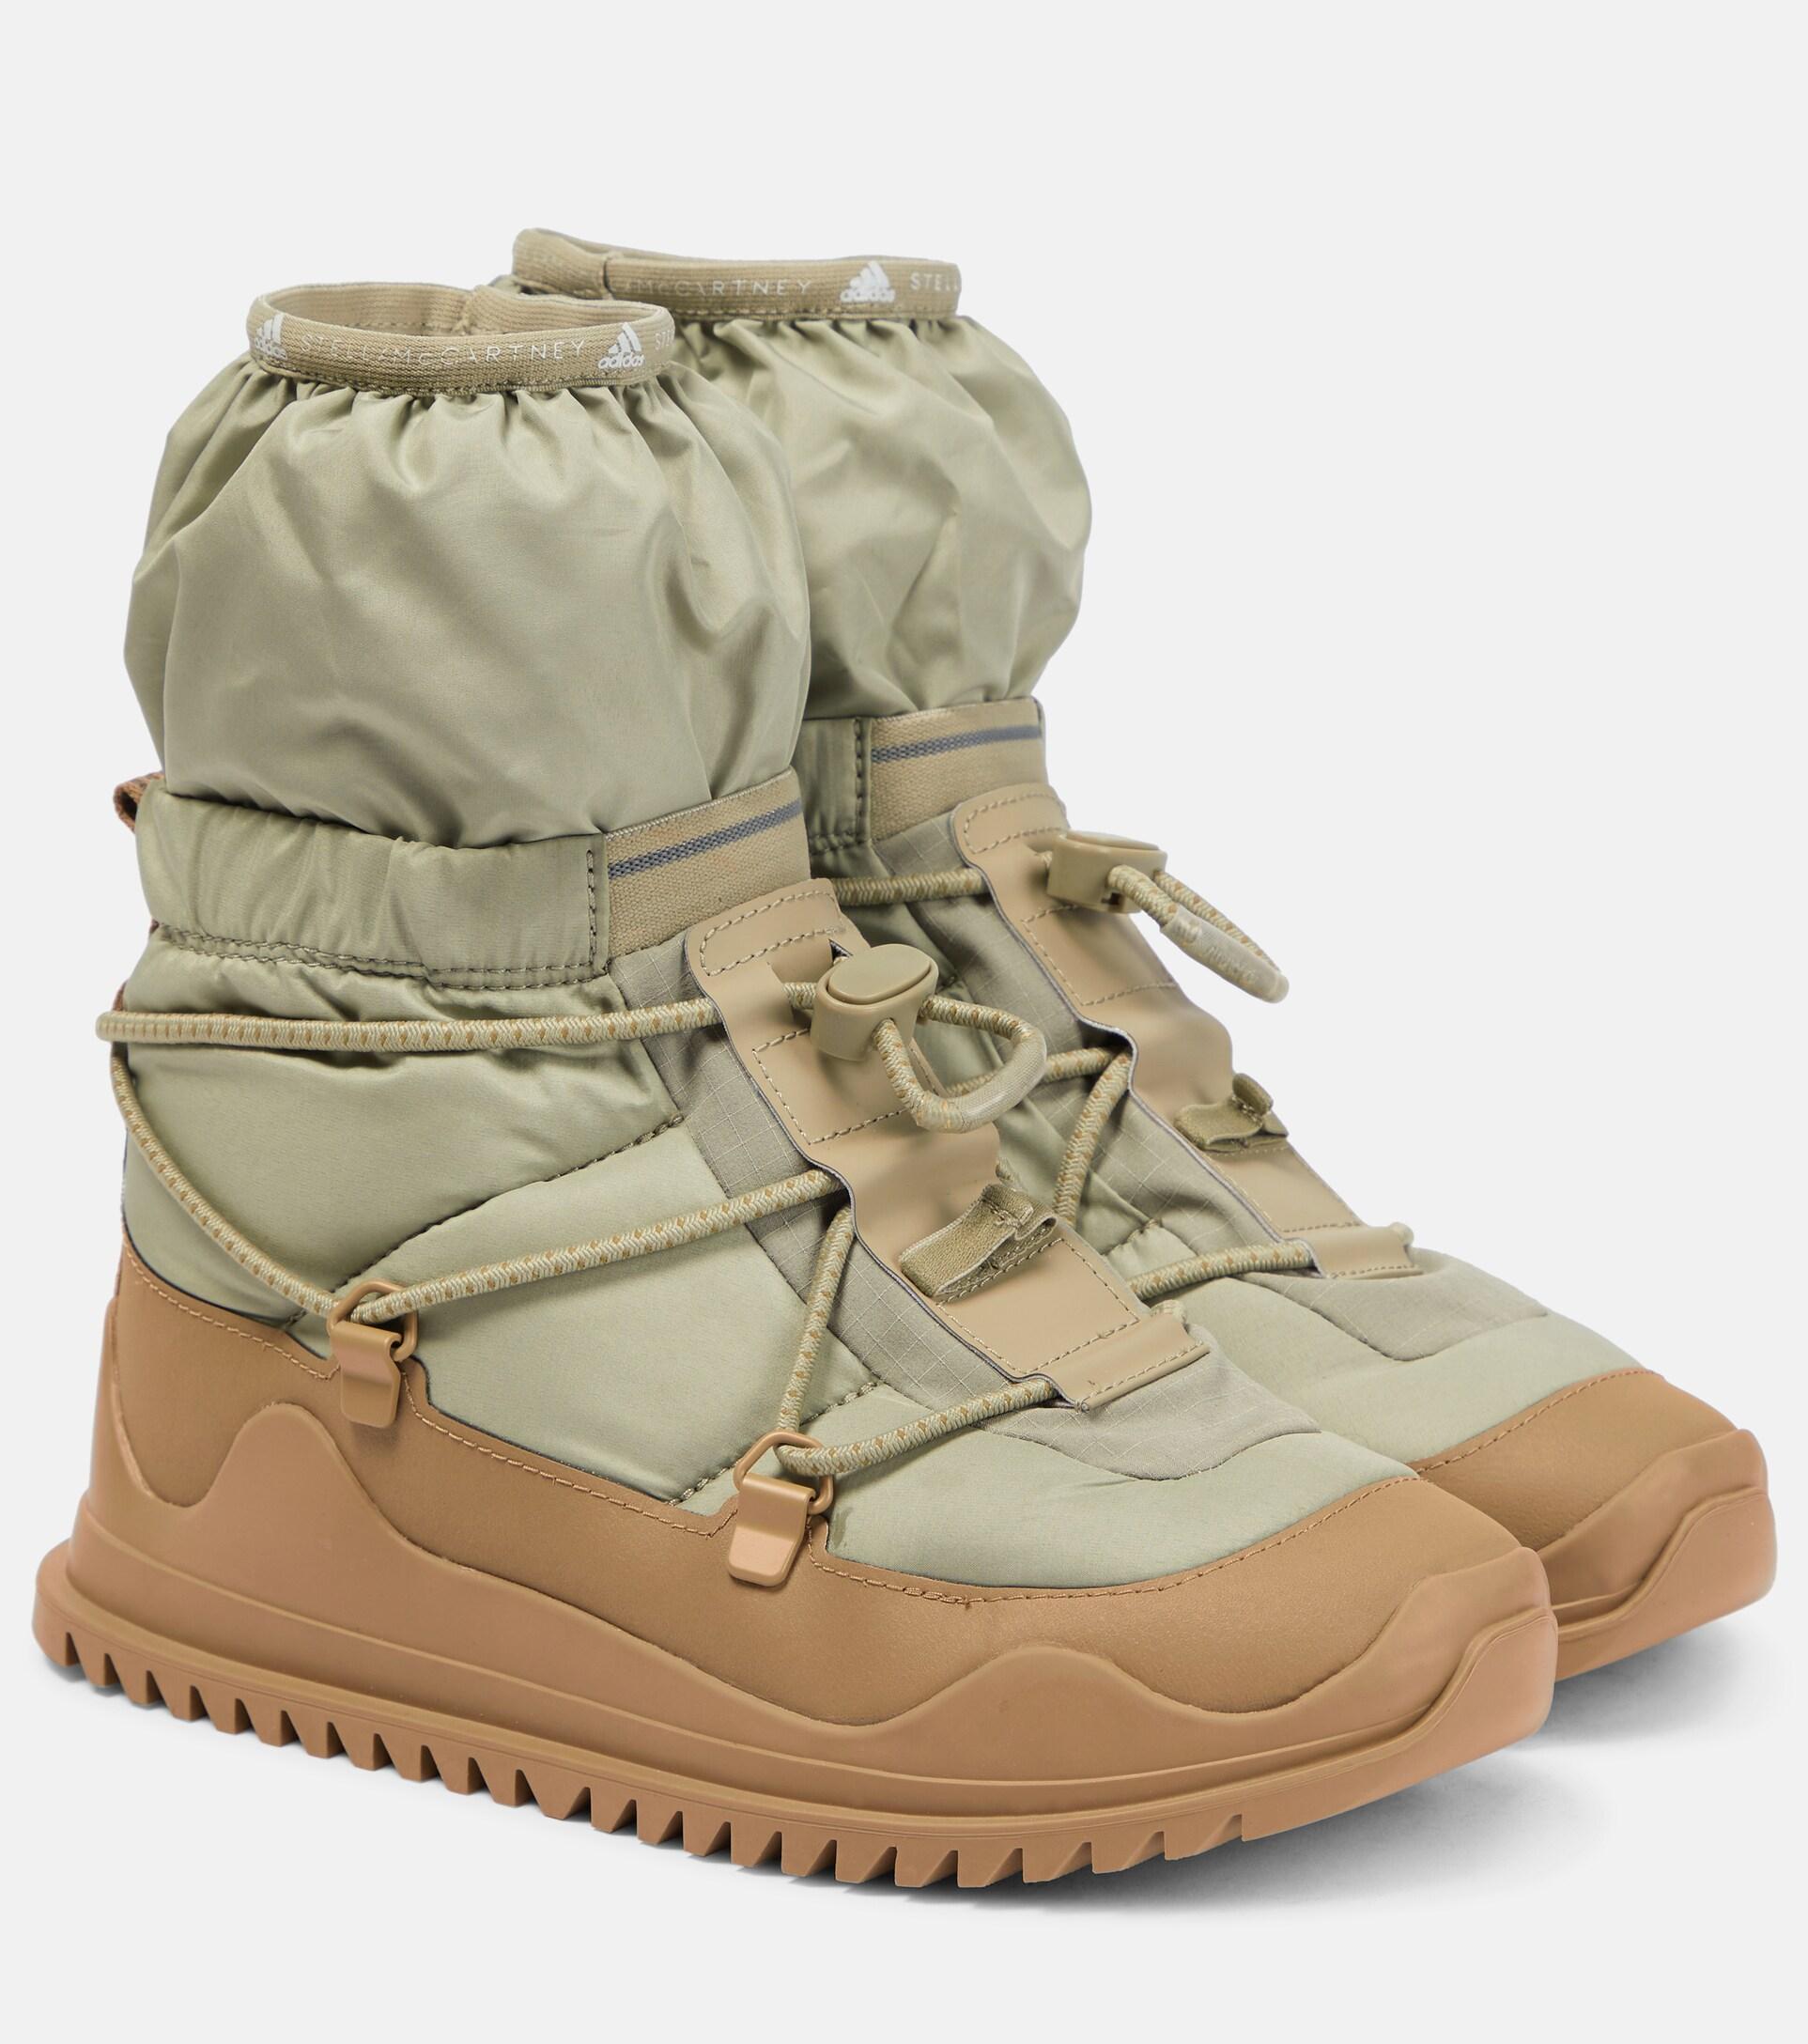 adidas By Stella McCartney Winter Snow Boots in Natural | Lyst